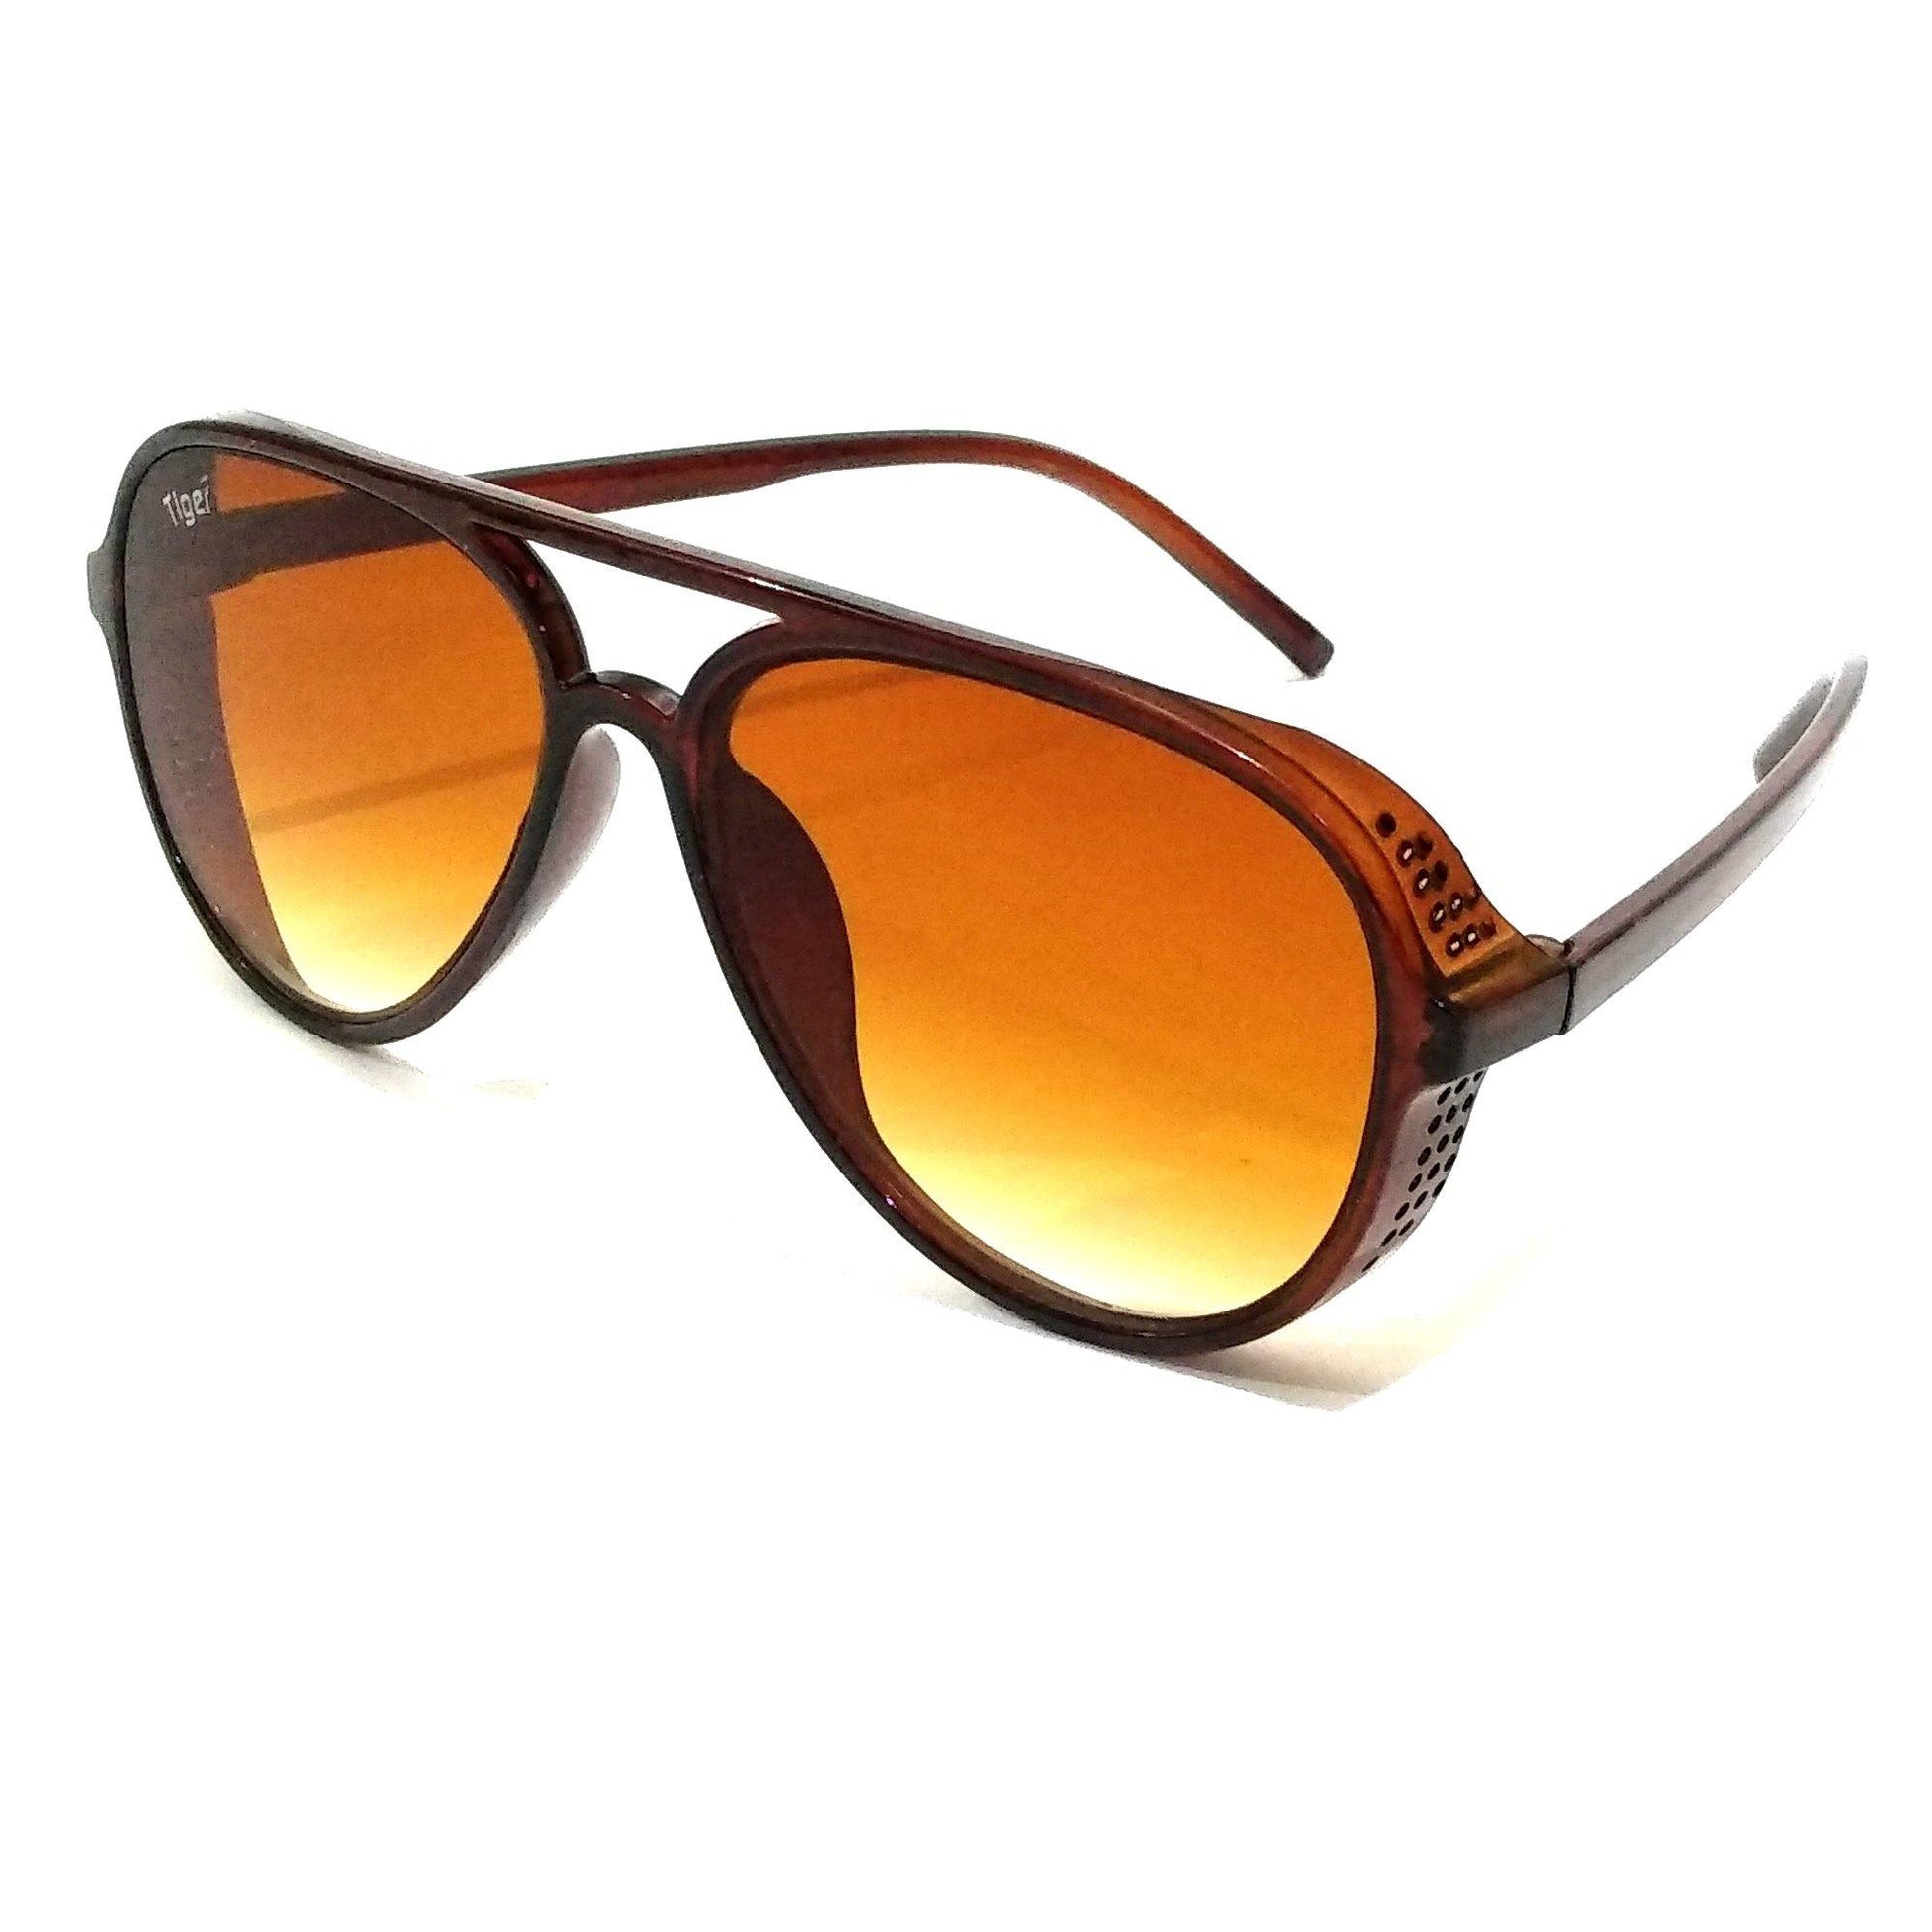 Buy Brown Steampunk Aviator Sunglasses for Men - Glasses India Online in India